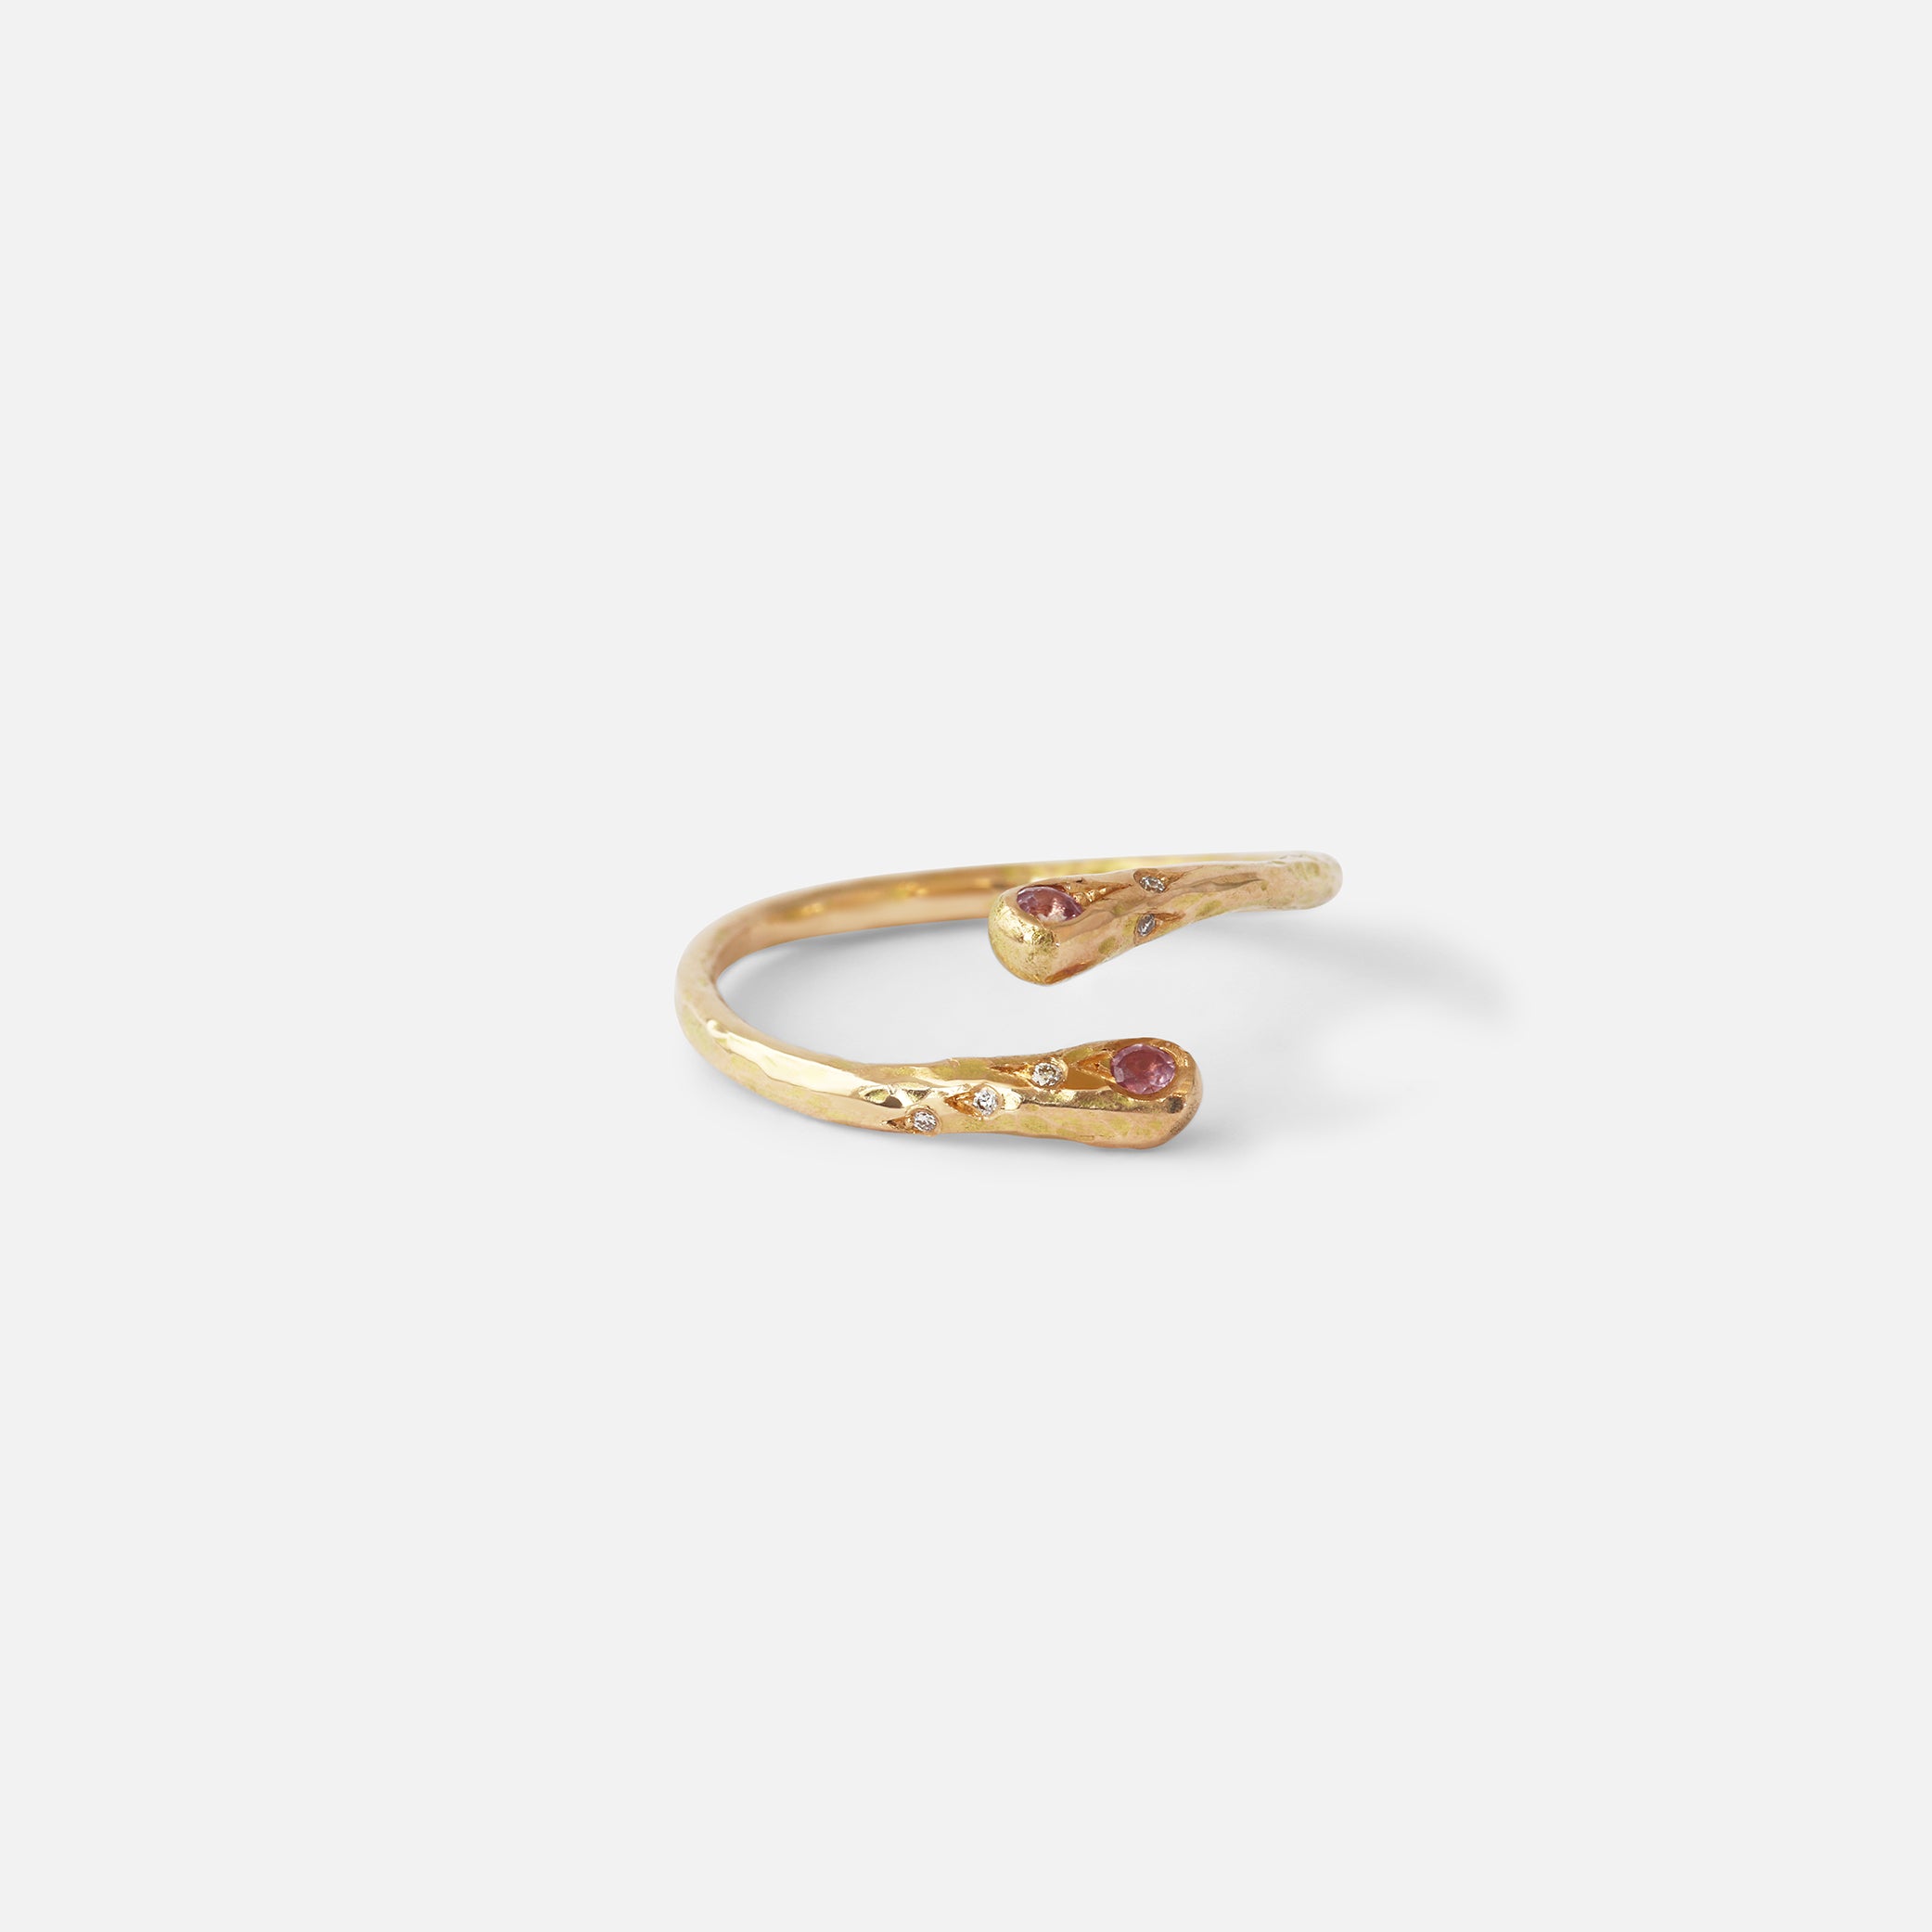 Rising Sundrop Ring By Embirikos in rings Category